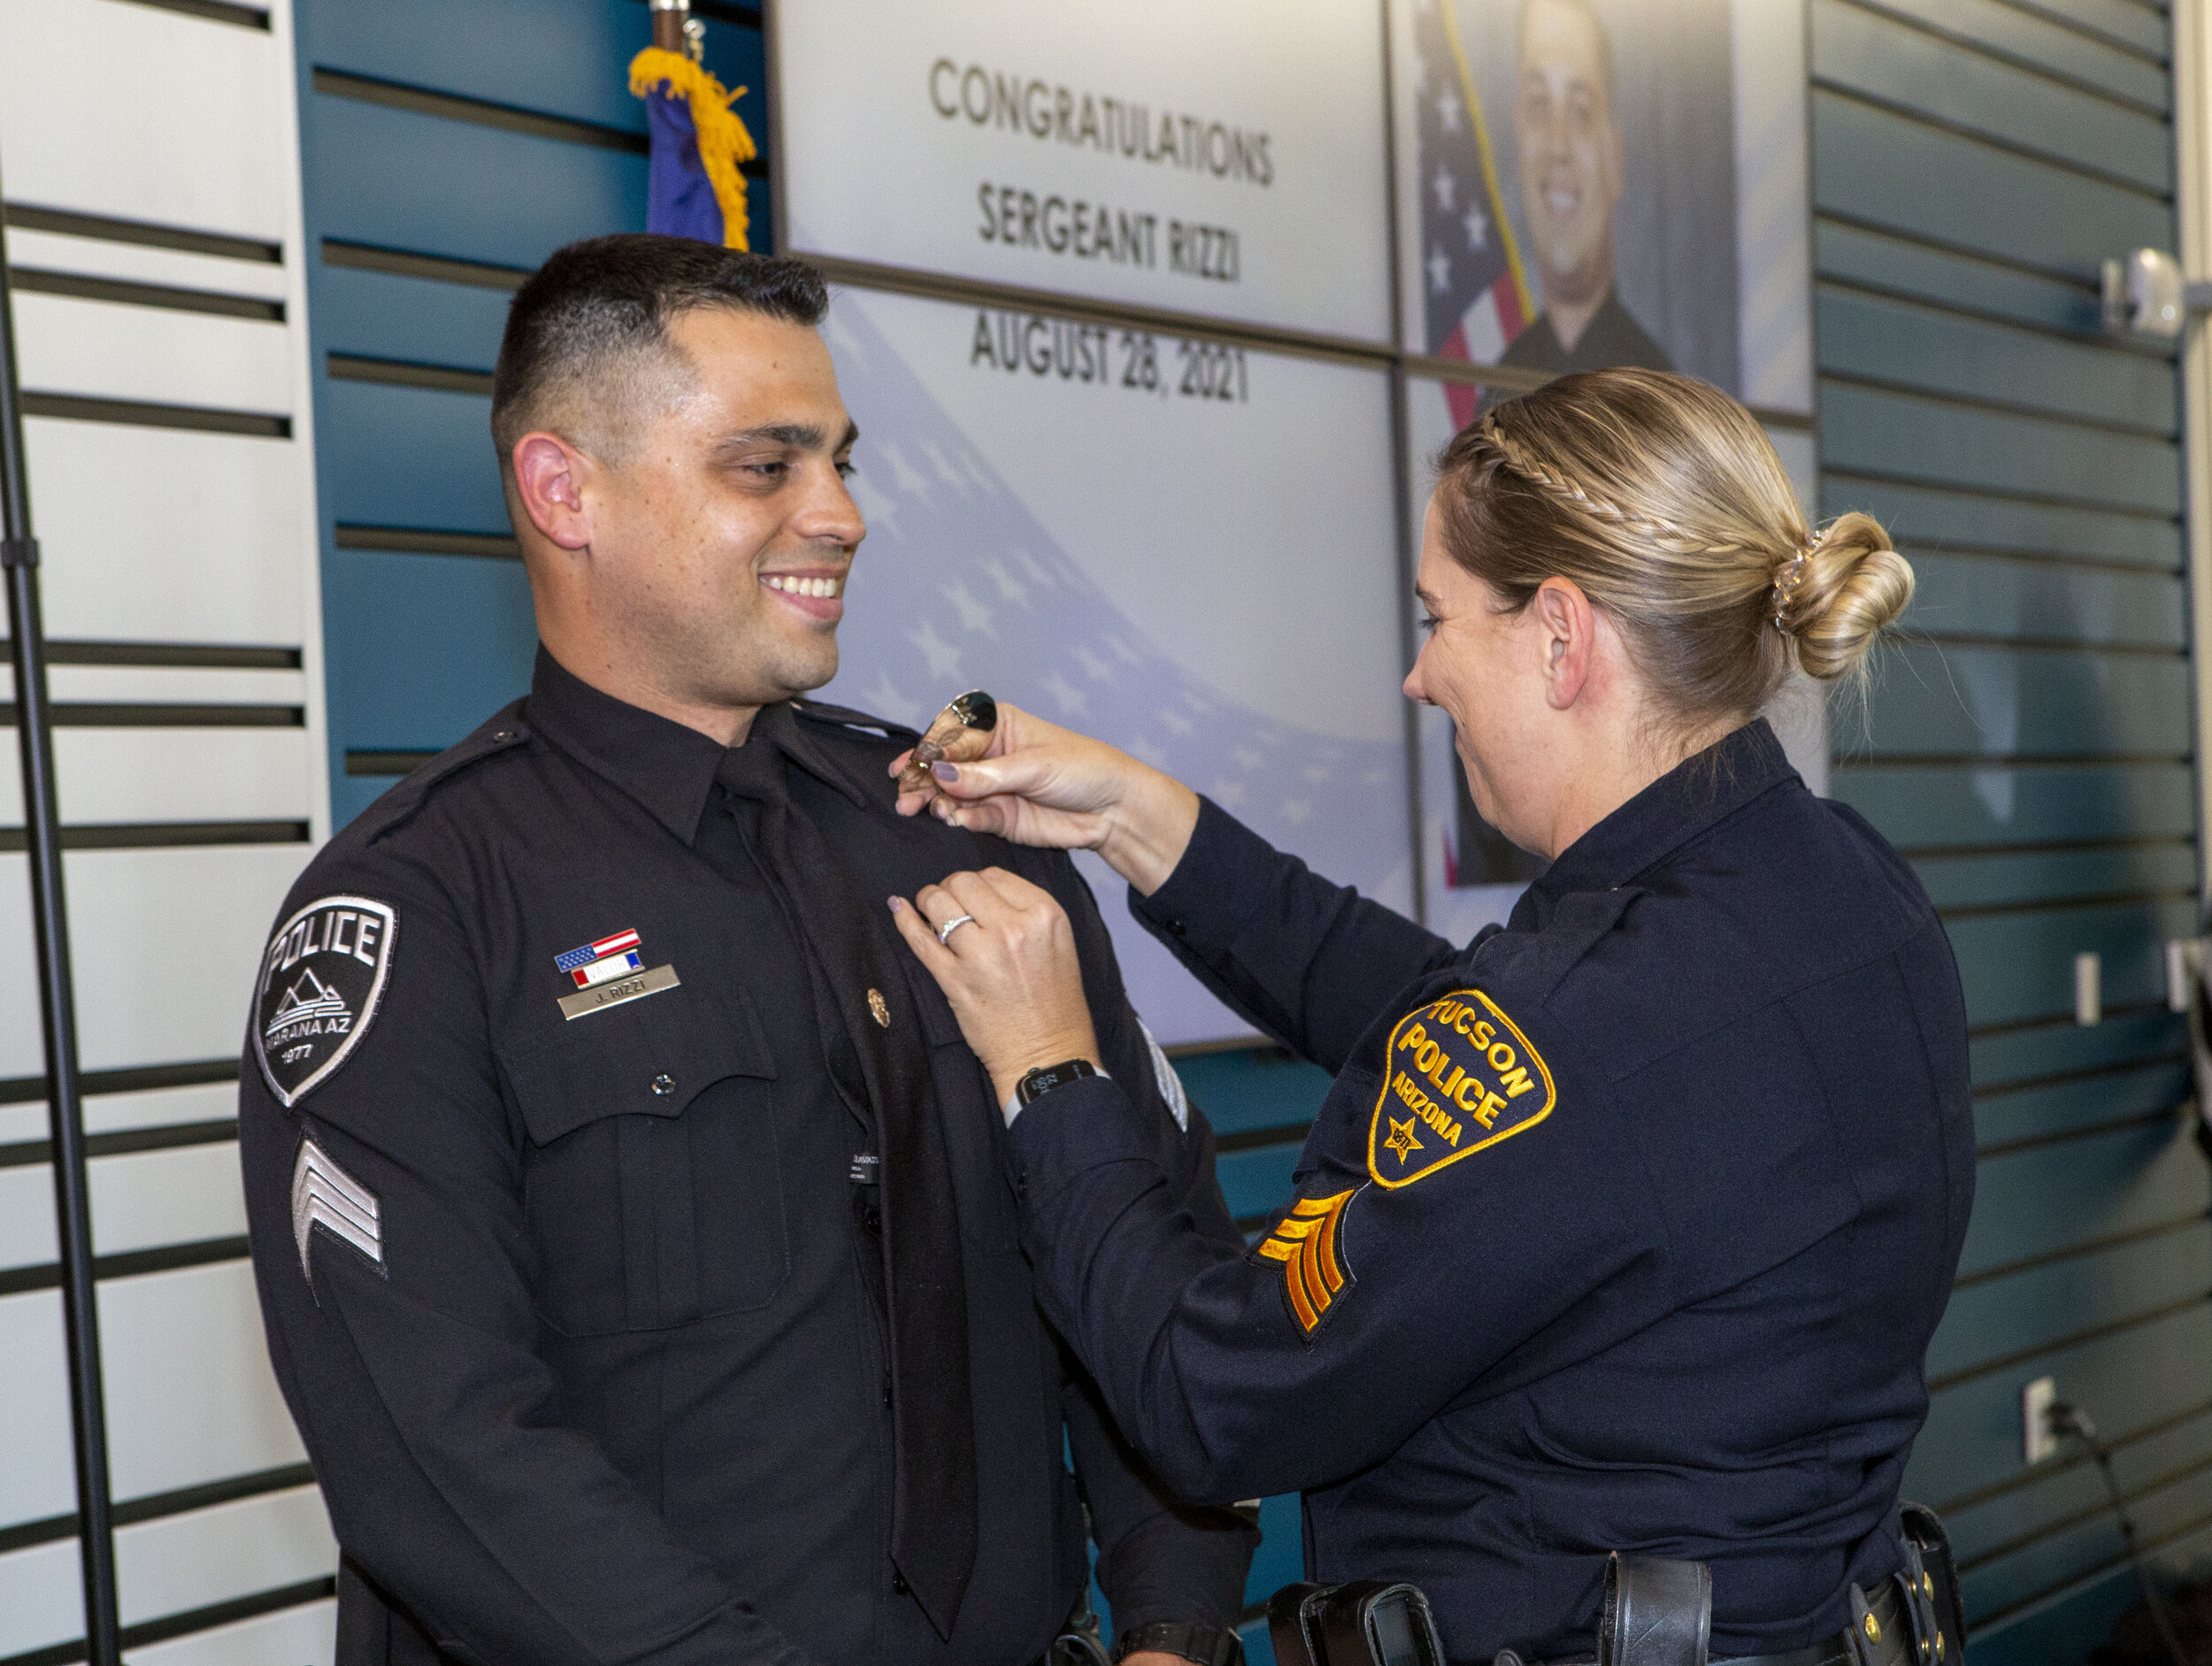 Sergeant Rizzi receiving his badge